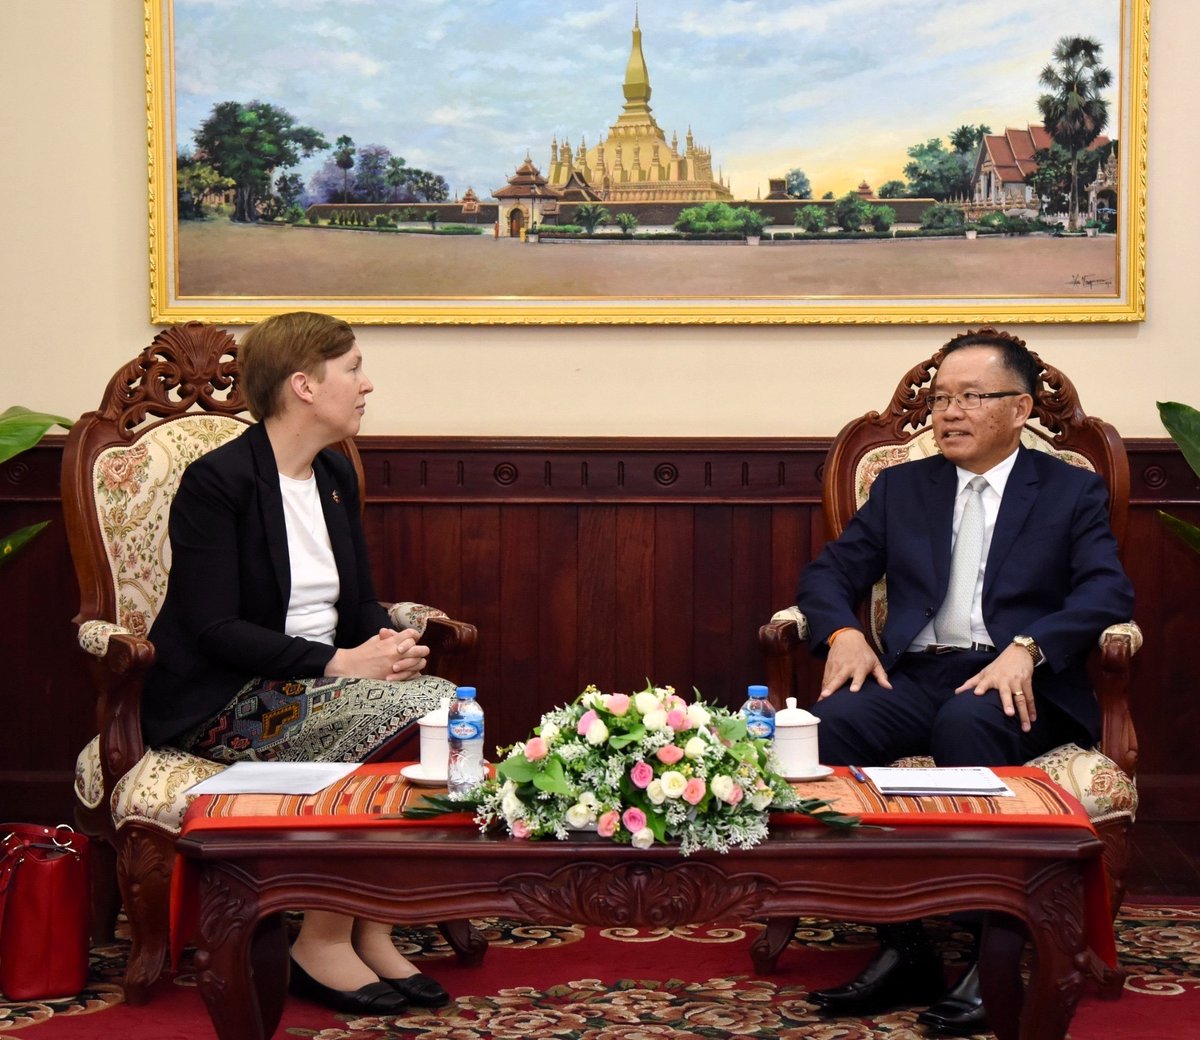 🇱🇦 is a valued partner in delivering our Comprehensive Strategic Partnership with @ASEAN. Great to discuss #ASEAN cooperation with the Vice Minister for Foreign Affairs & our dedicated support for 🇱🇦 as ASEAN Chair #ASEAN50AUS